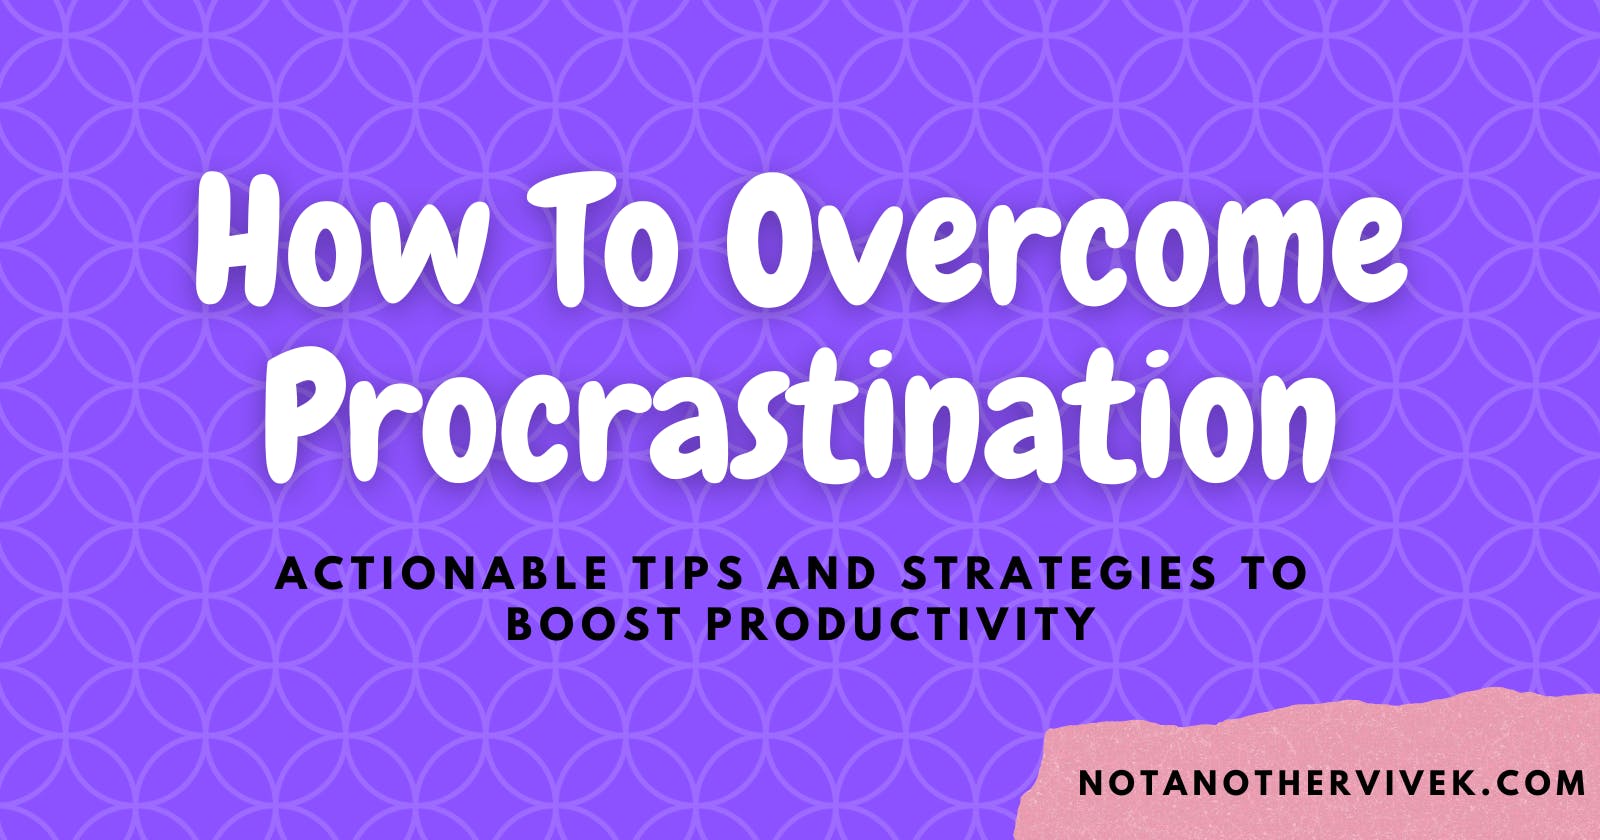 Strategies and Tips to Overcome Procrastination and Increase Productivity